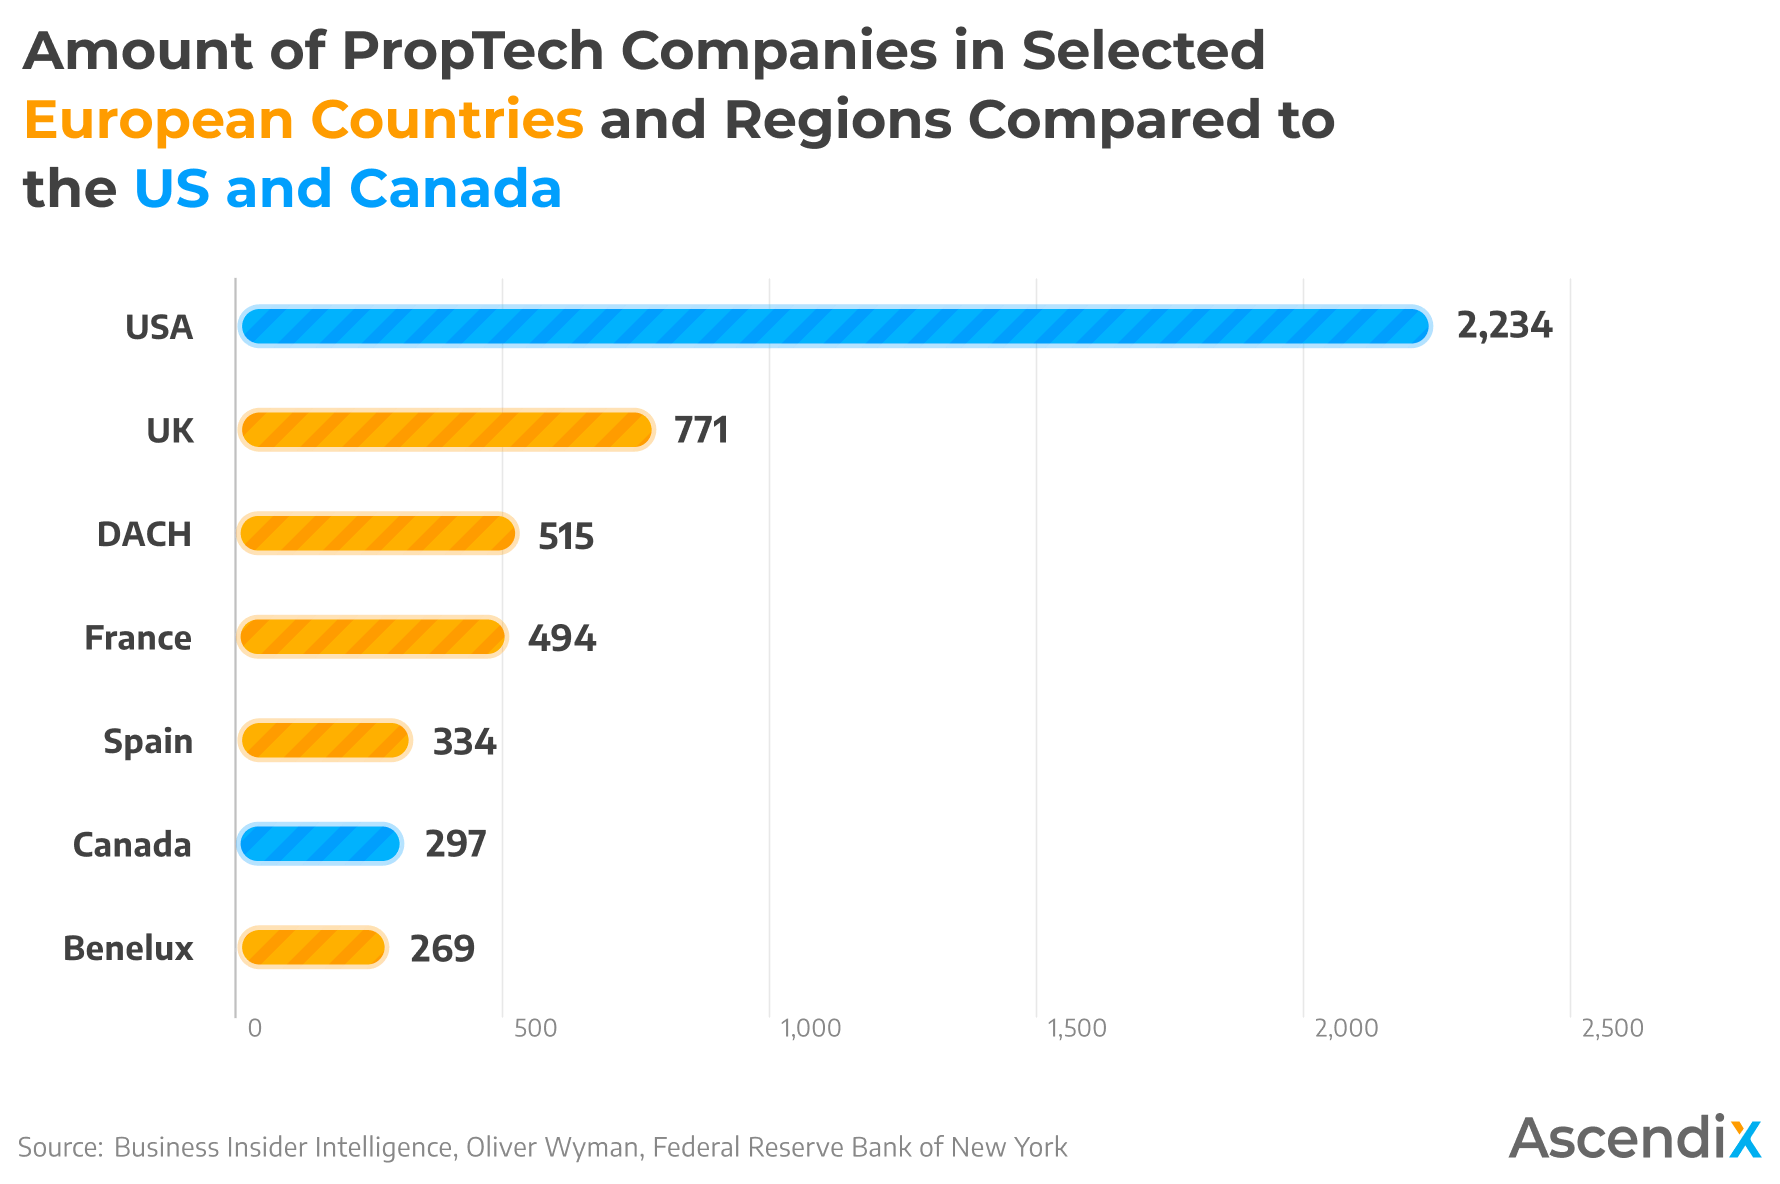 Comparison of Proptech Companies Number in Europe, US, and Canada